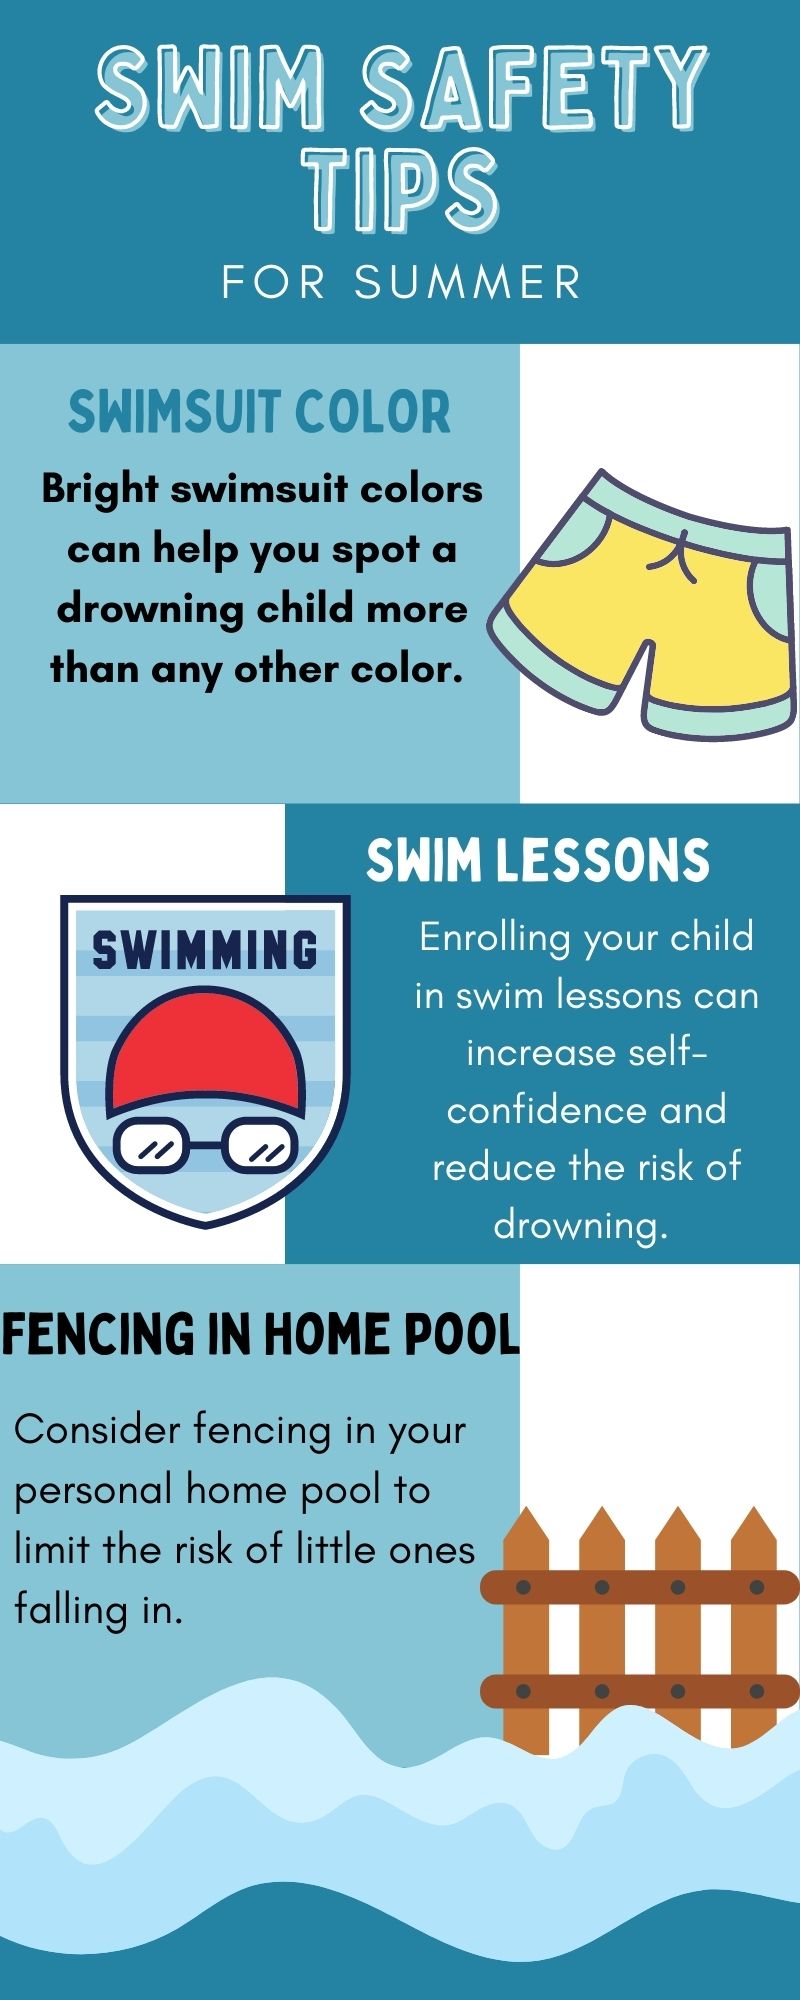 Infographic points on swimsuit color, swim lessons and adding fencing